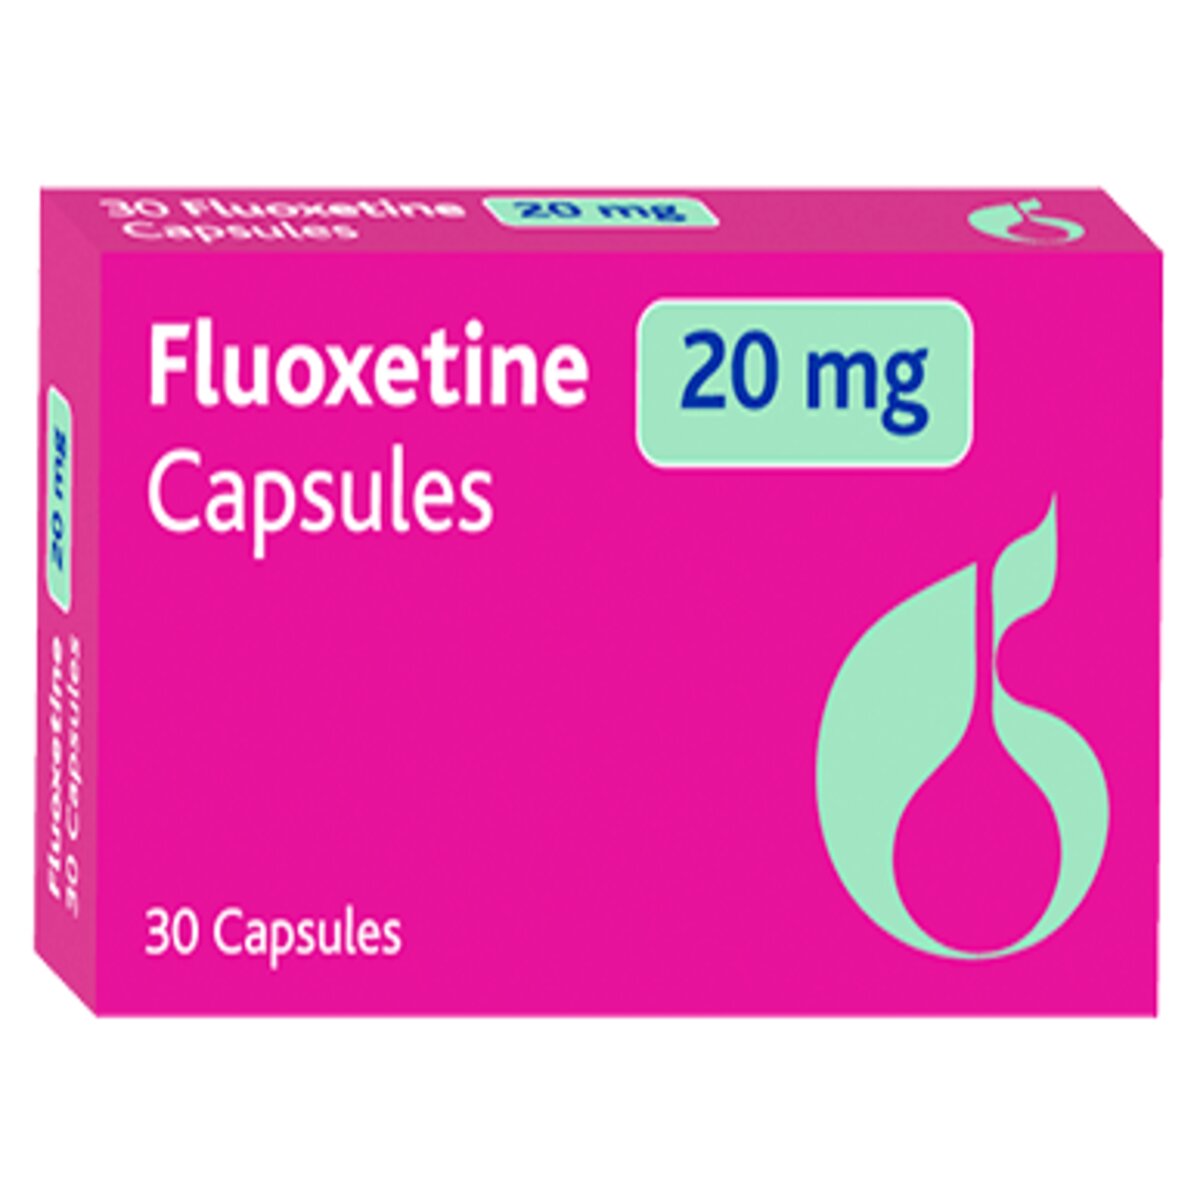 Fluoxetine for dogs and cats: Uses, Dosage & Side Effects